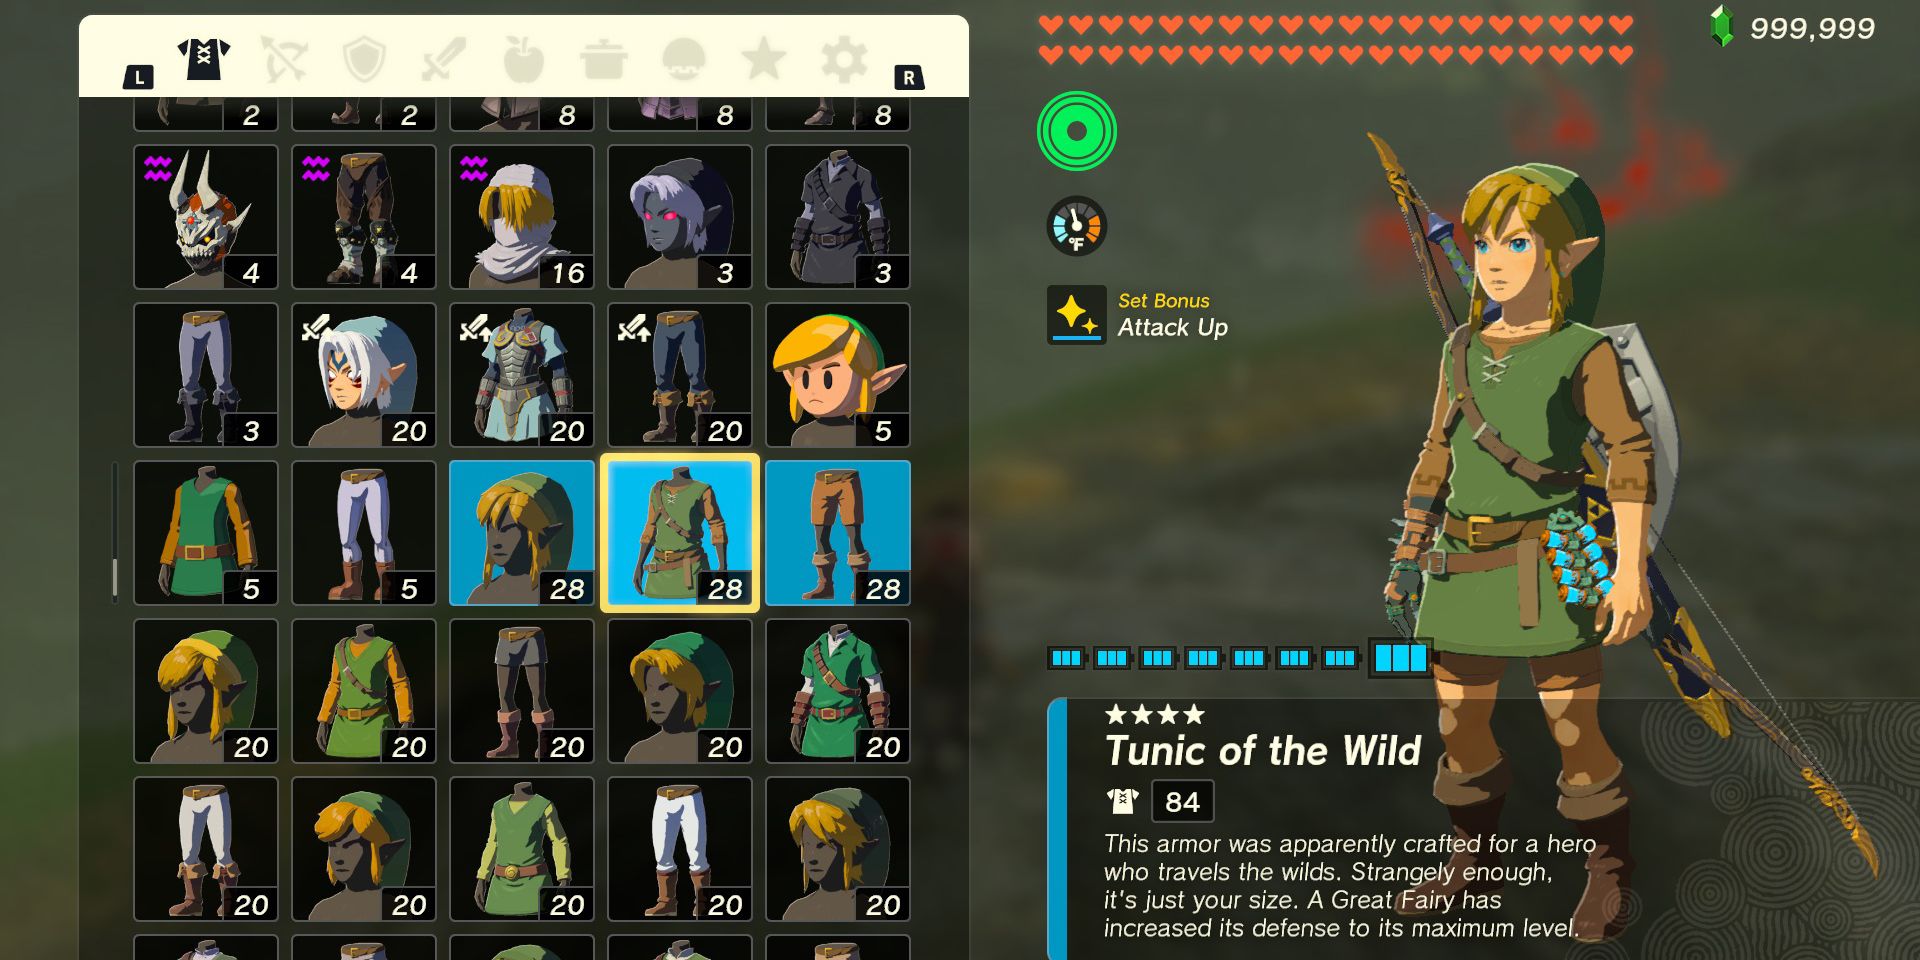 The Armor of the Wild Armor Set in The Legend of Zelda: Tears of the Kingdom